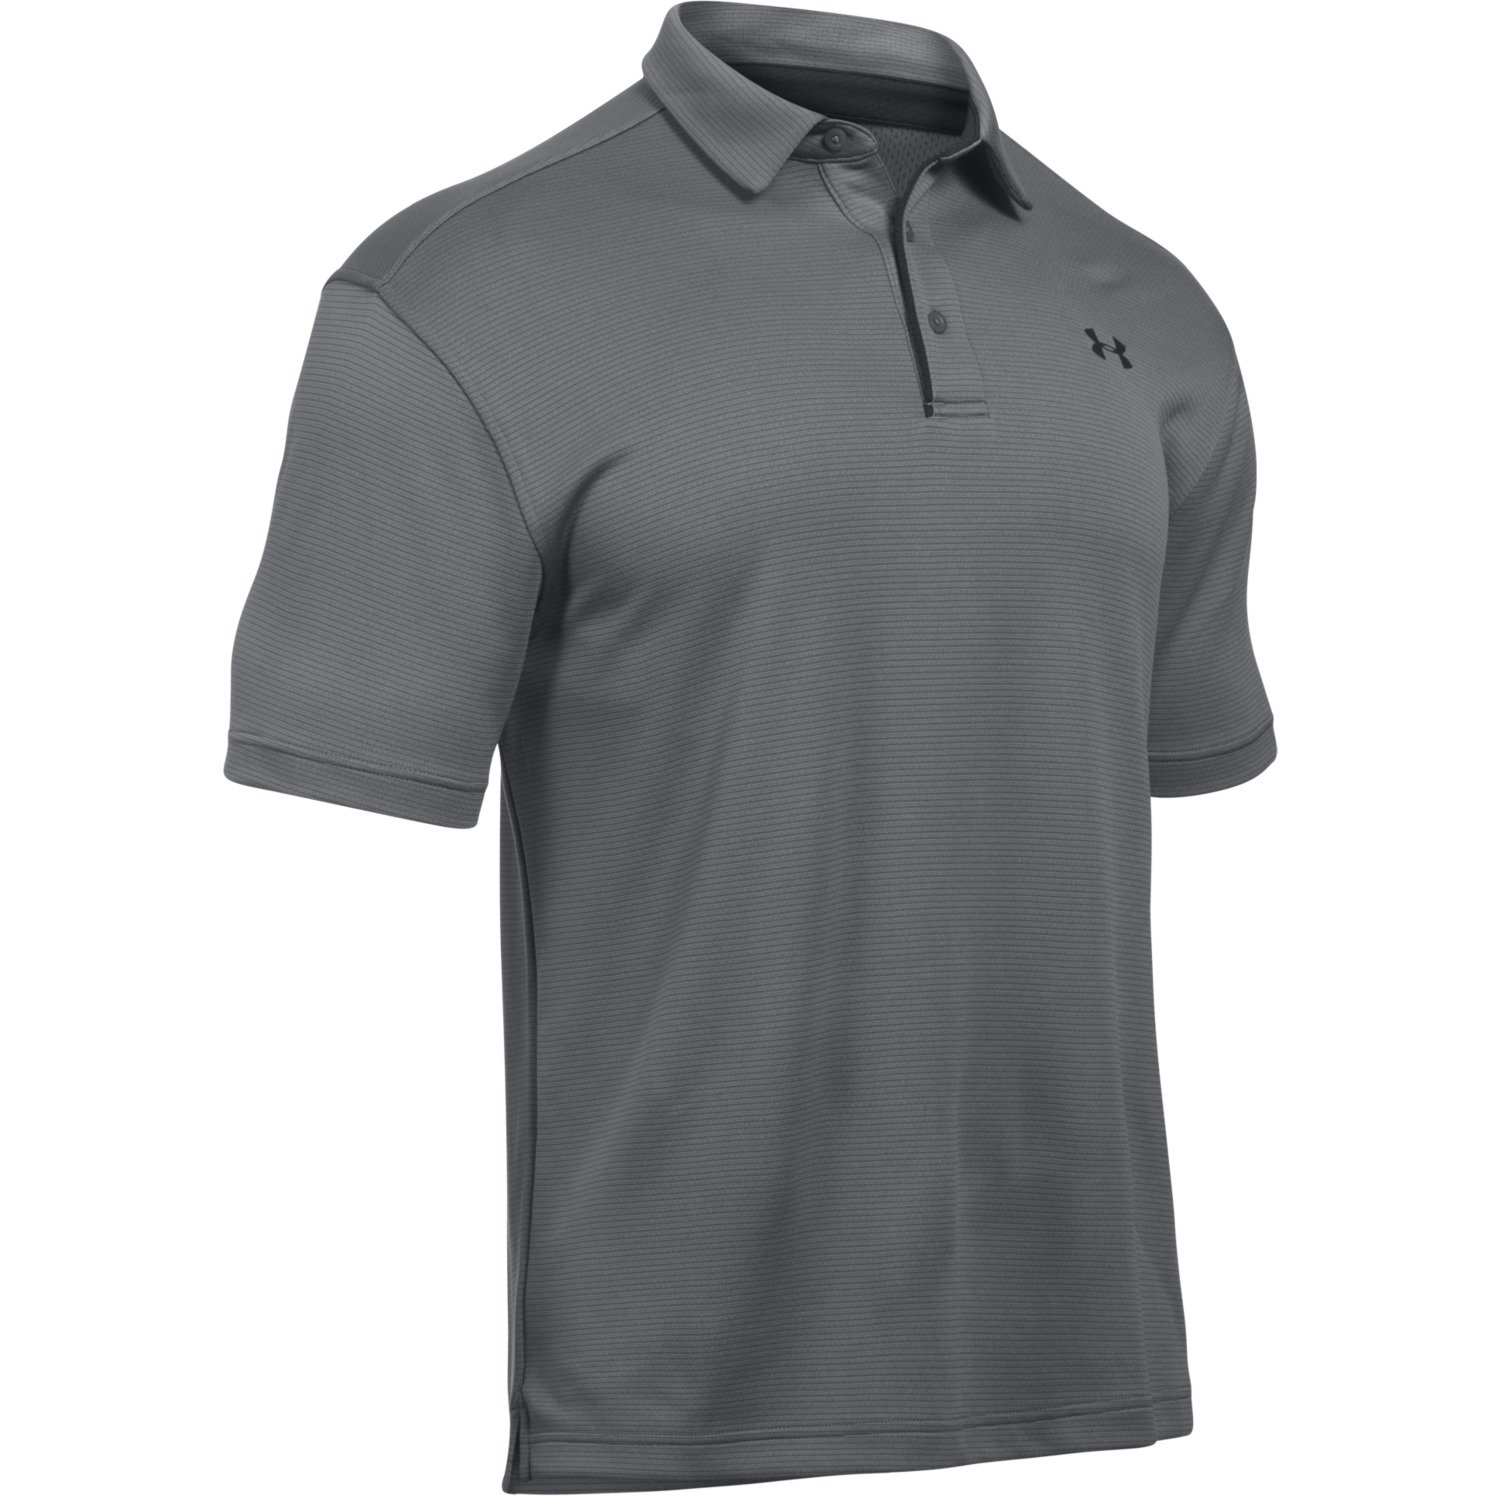 Under Armour Men's New Tech Polo Shirt                                                                                           - view number 1 selected